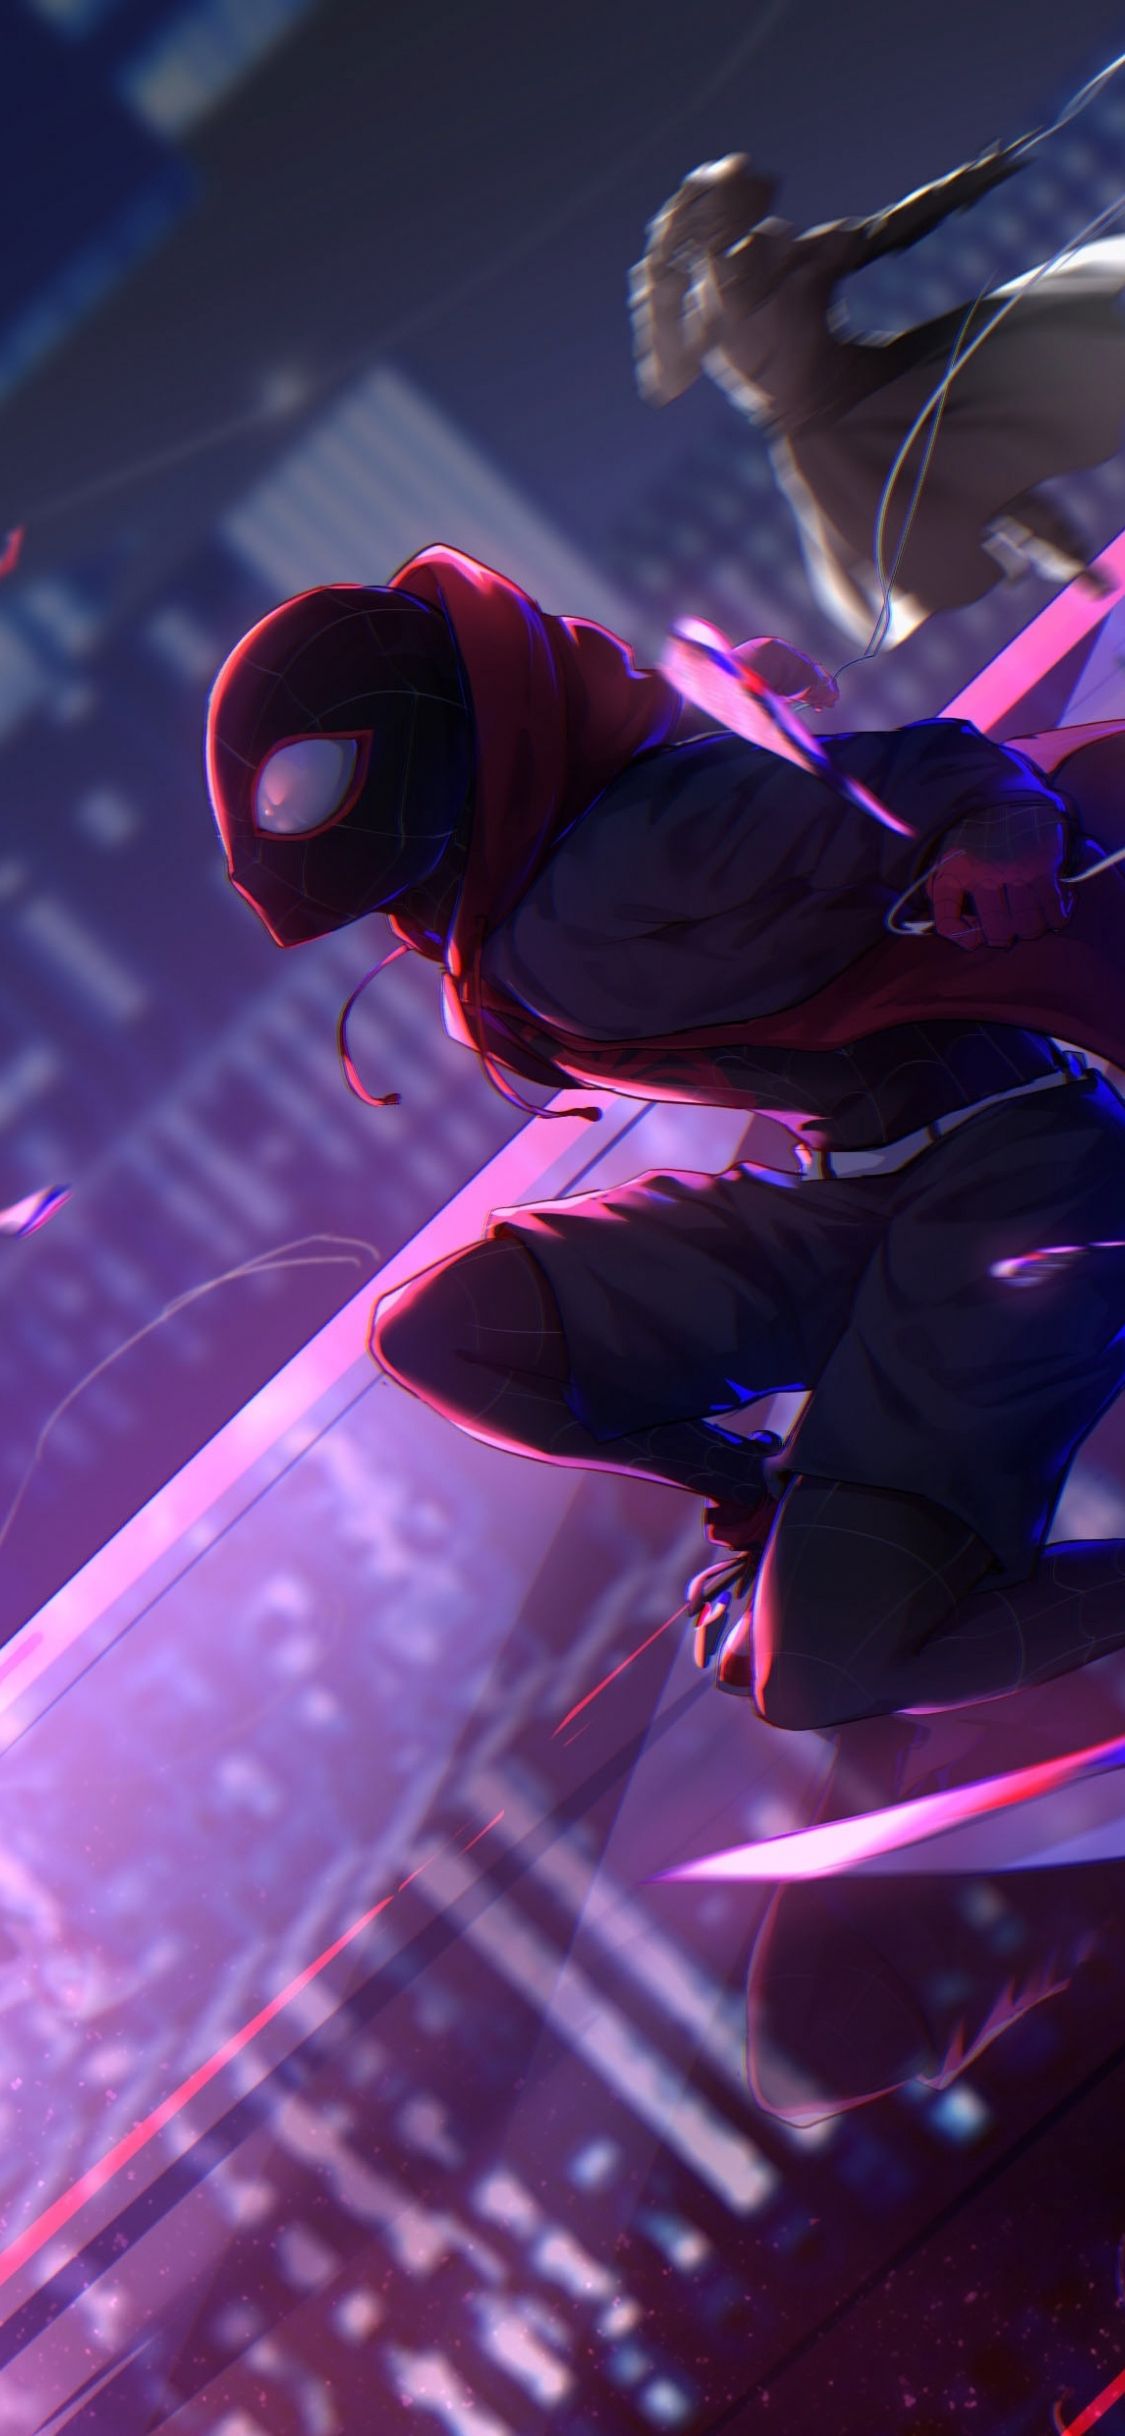 Download 1125x2436 wallpaper movie, animation movie, miles morales, iphone x 1125x2436 HD image, background, 17325